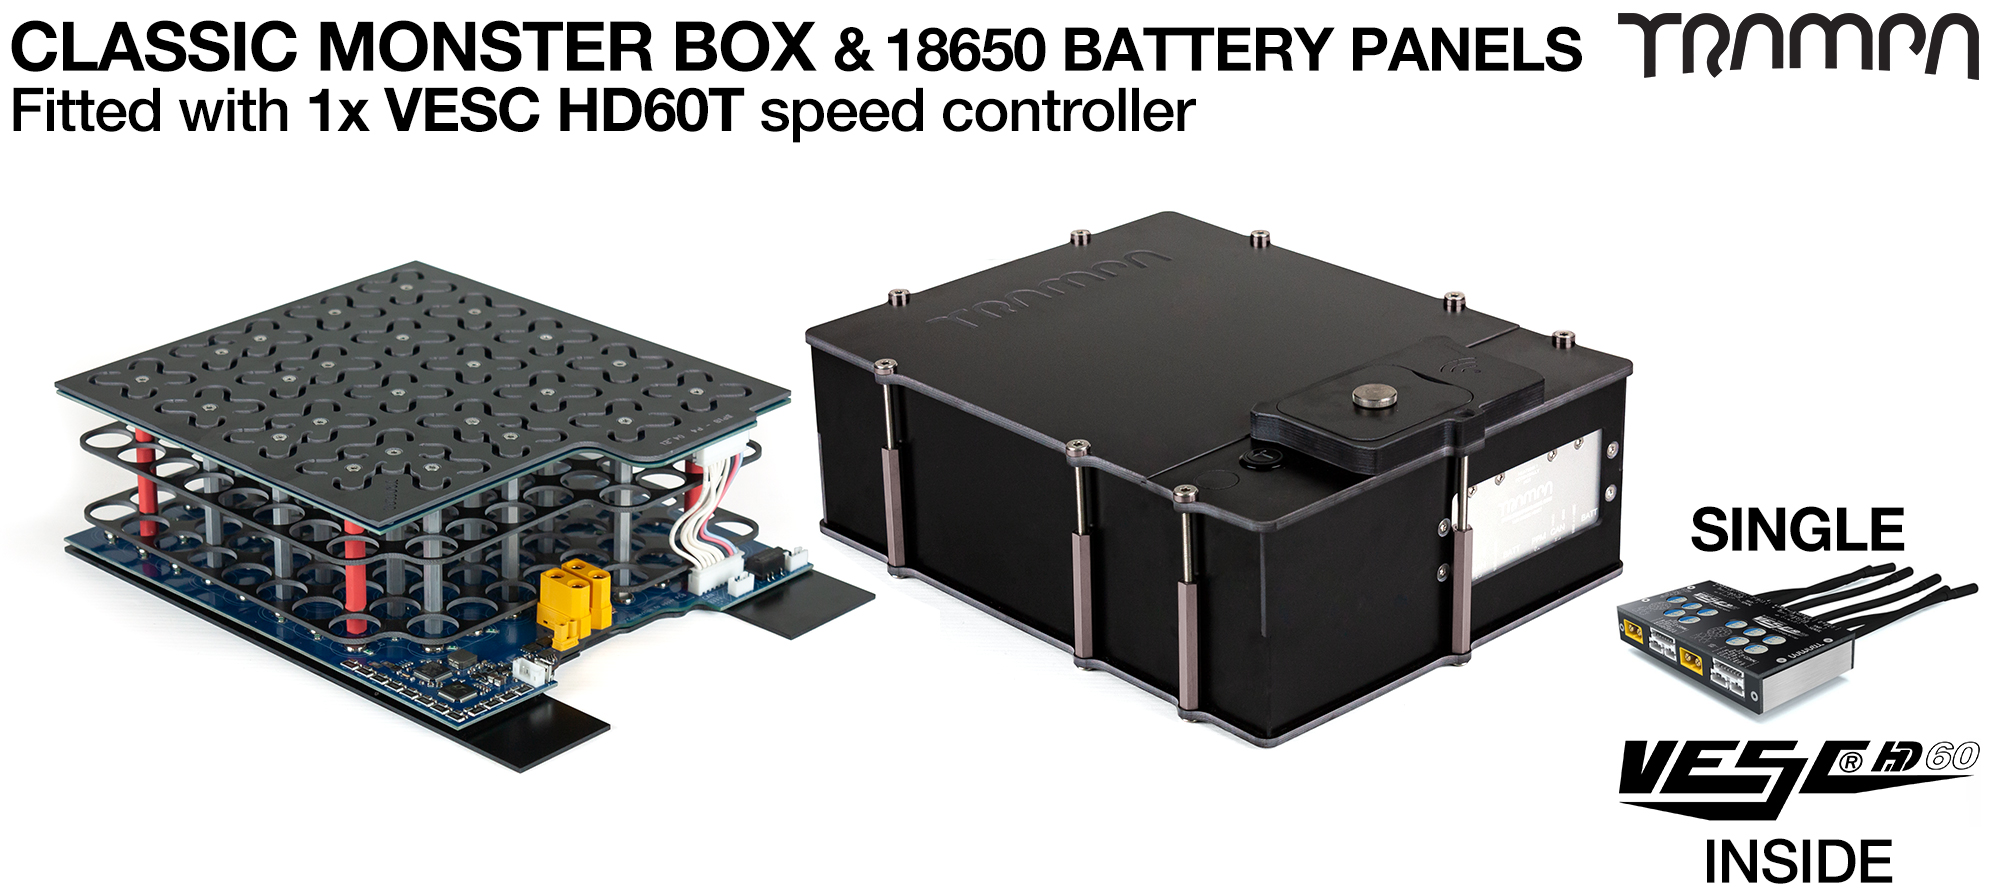 Classic MONSTER Box MkV - with 18650 PCB Pack & VESC HD-60 Twin - NO CELLS PCB based Battery Pack with Integrated Battery Management System (BMS) - NO Cells